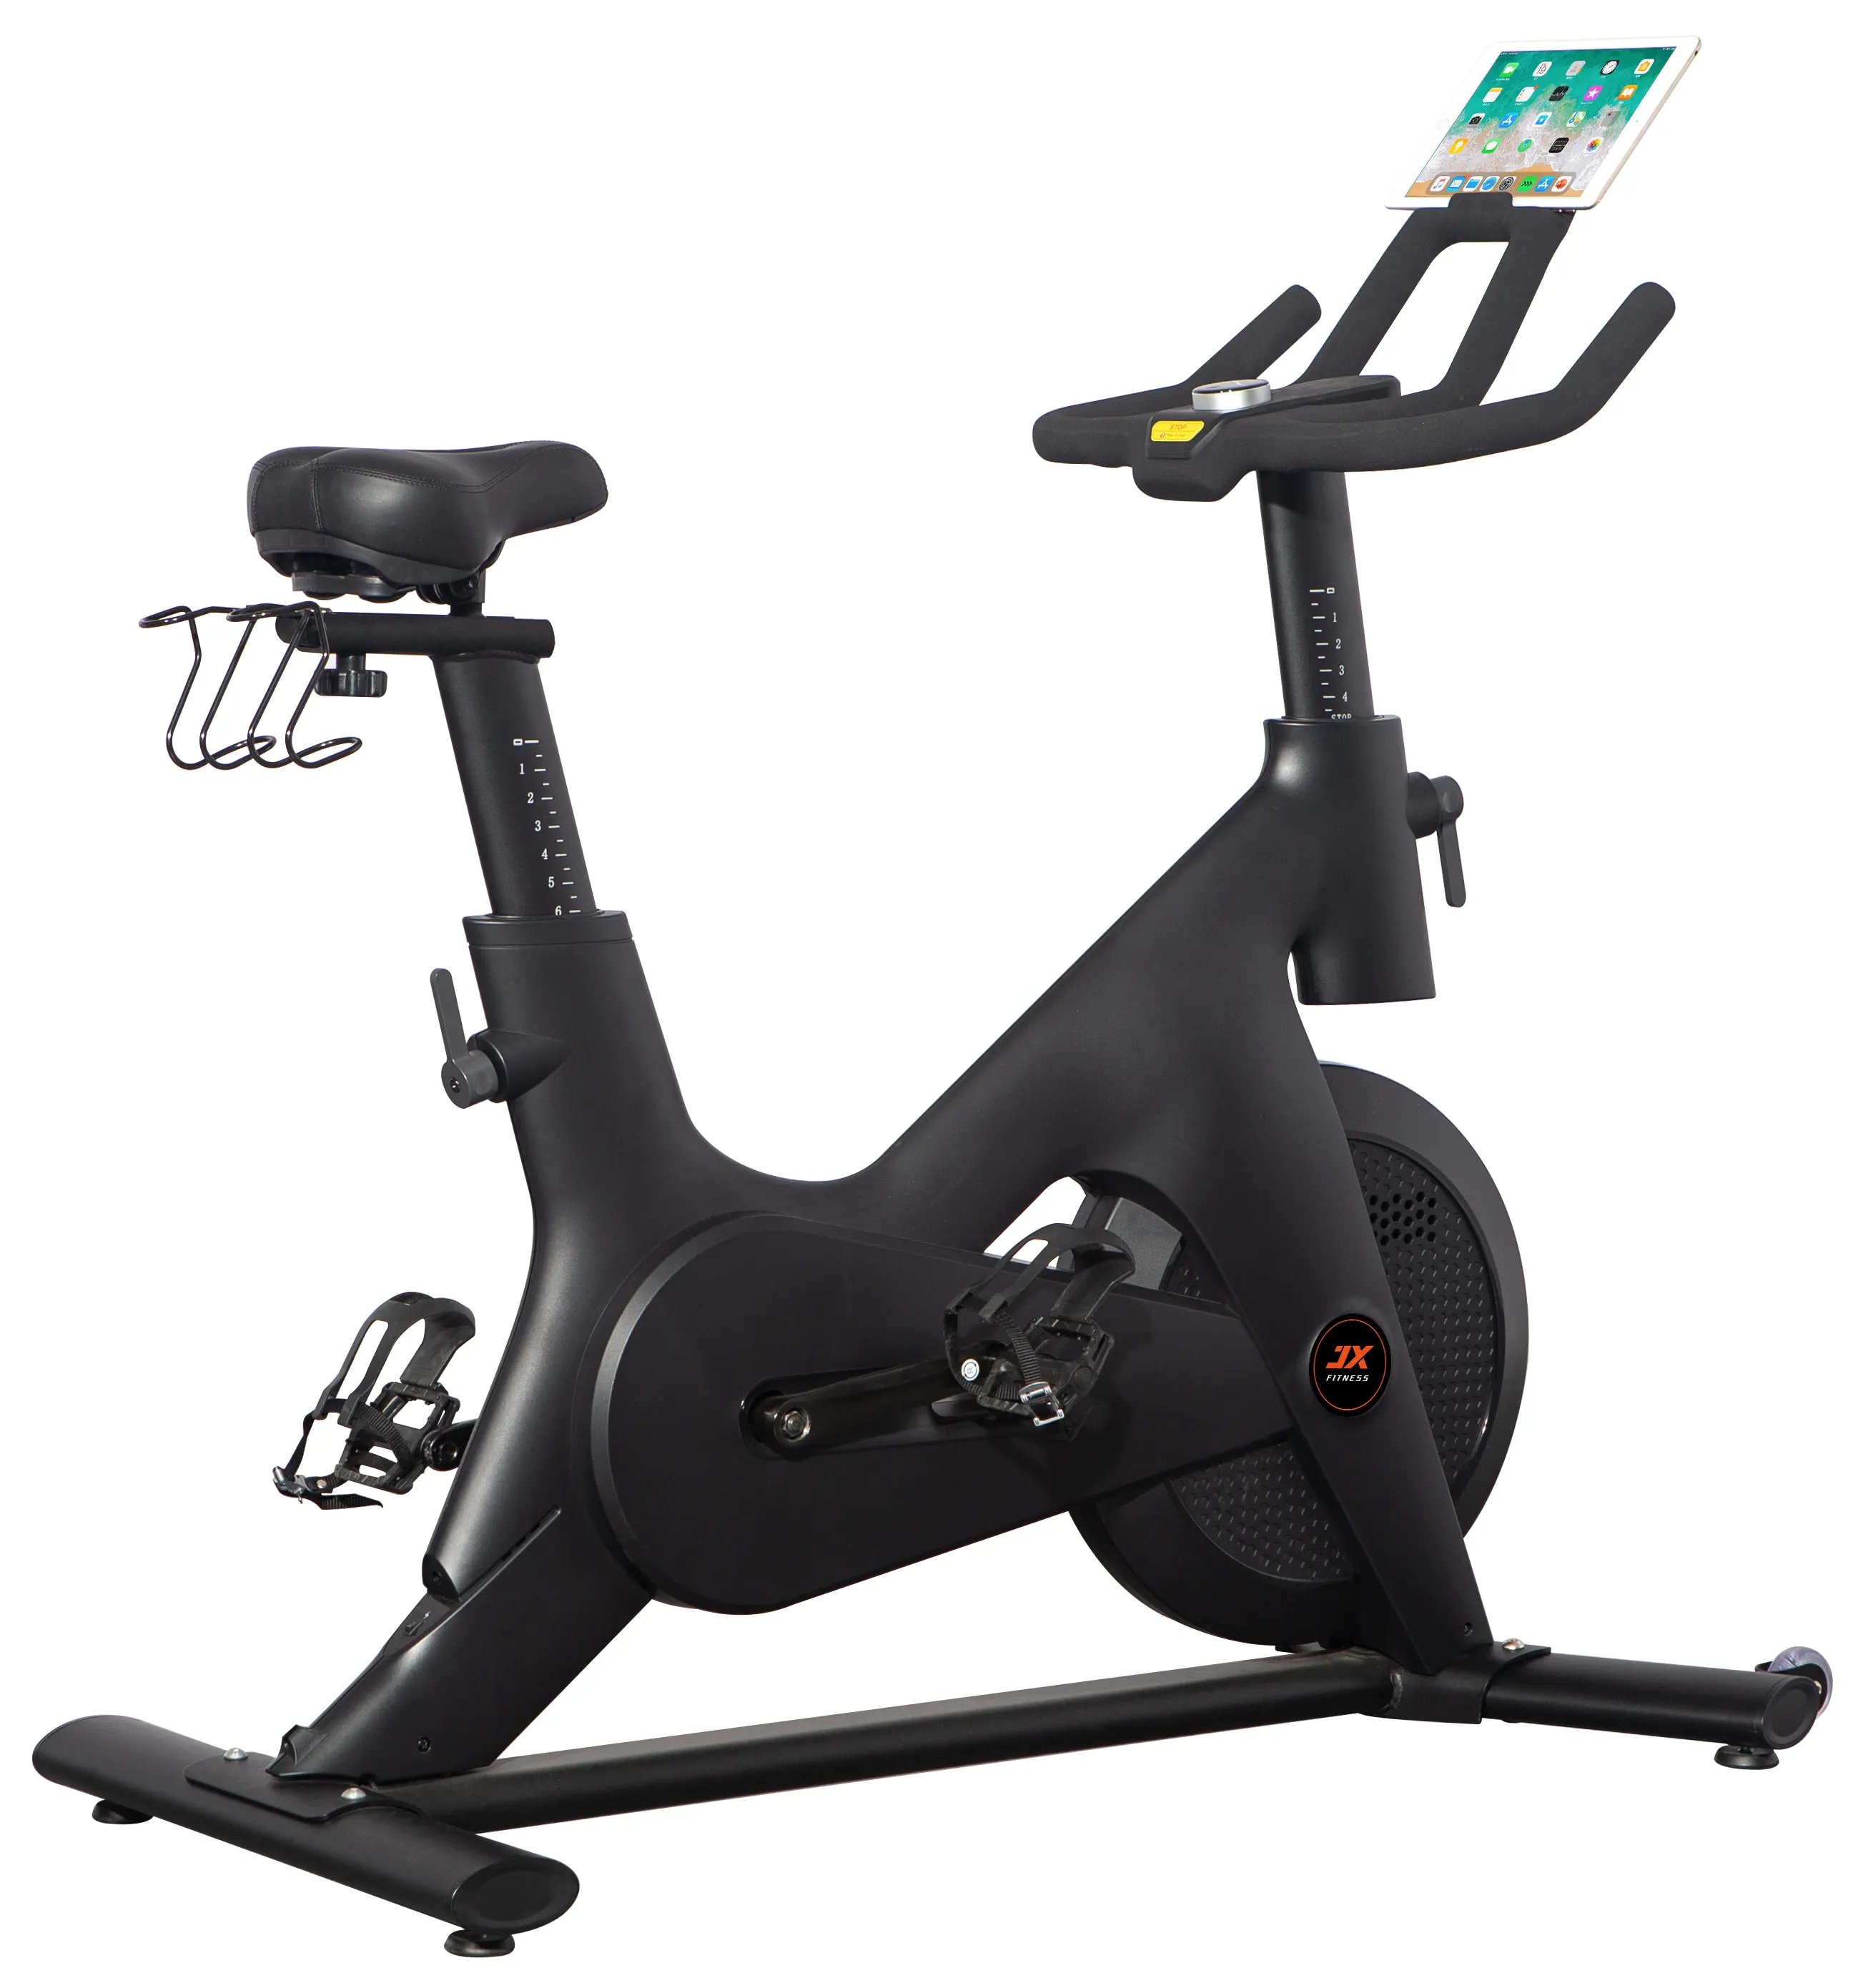 Factory direct sales ultra-quiet spin bike home gym exercise bike indoor bicycle sports fitness equipment